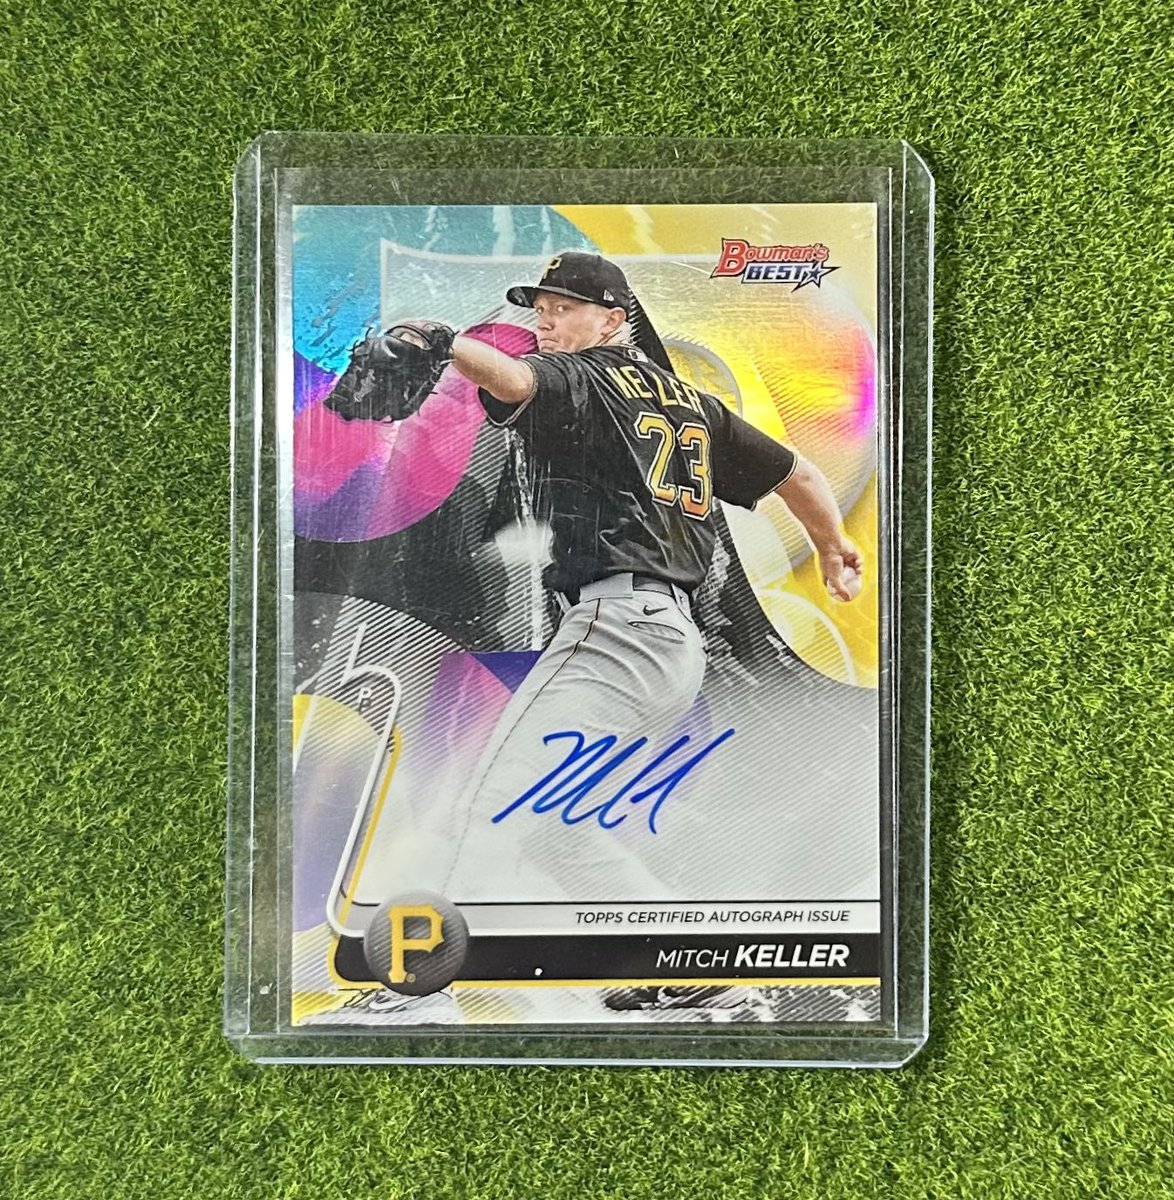 Things have been rough for the Bucs lately and it has suppressed our opportunities of showing our gratitude for all of yinz

Just to do a little give back to all who support, we'll give this Mitch Keller autograph to one of yinz 💛

RULES: Follow, like, retweet 

#LetsGoBucs